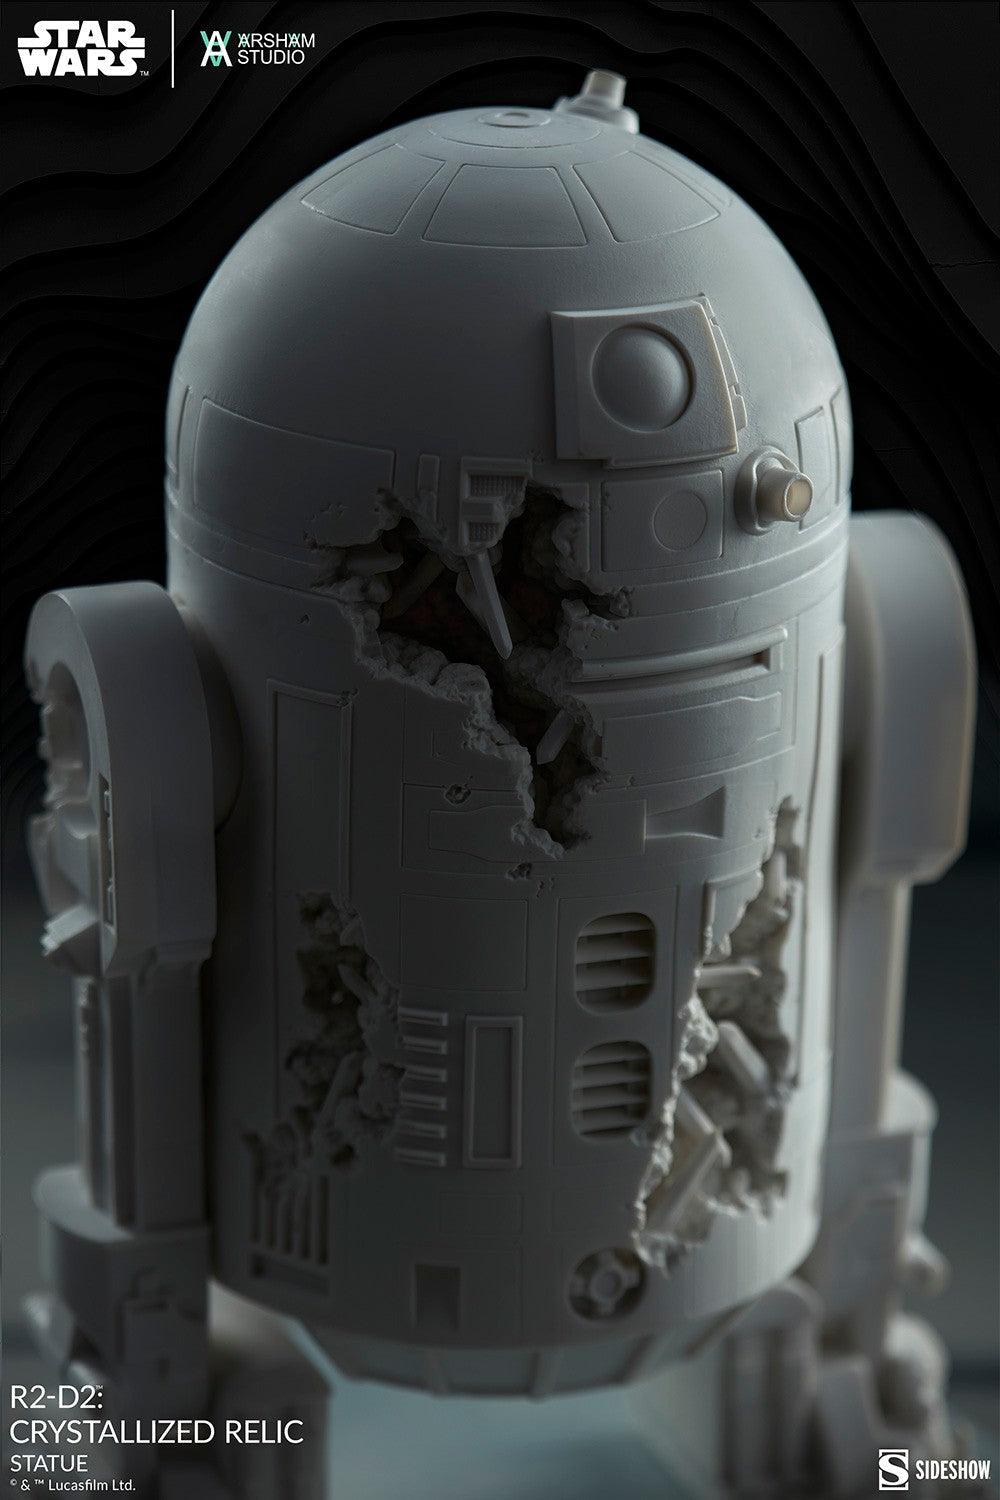 Star Wars - RD-D2 Crystallized Relic Statue Statue by Sideshow Collectibles | Titan Pop Culture